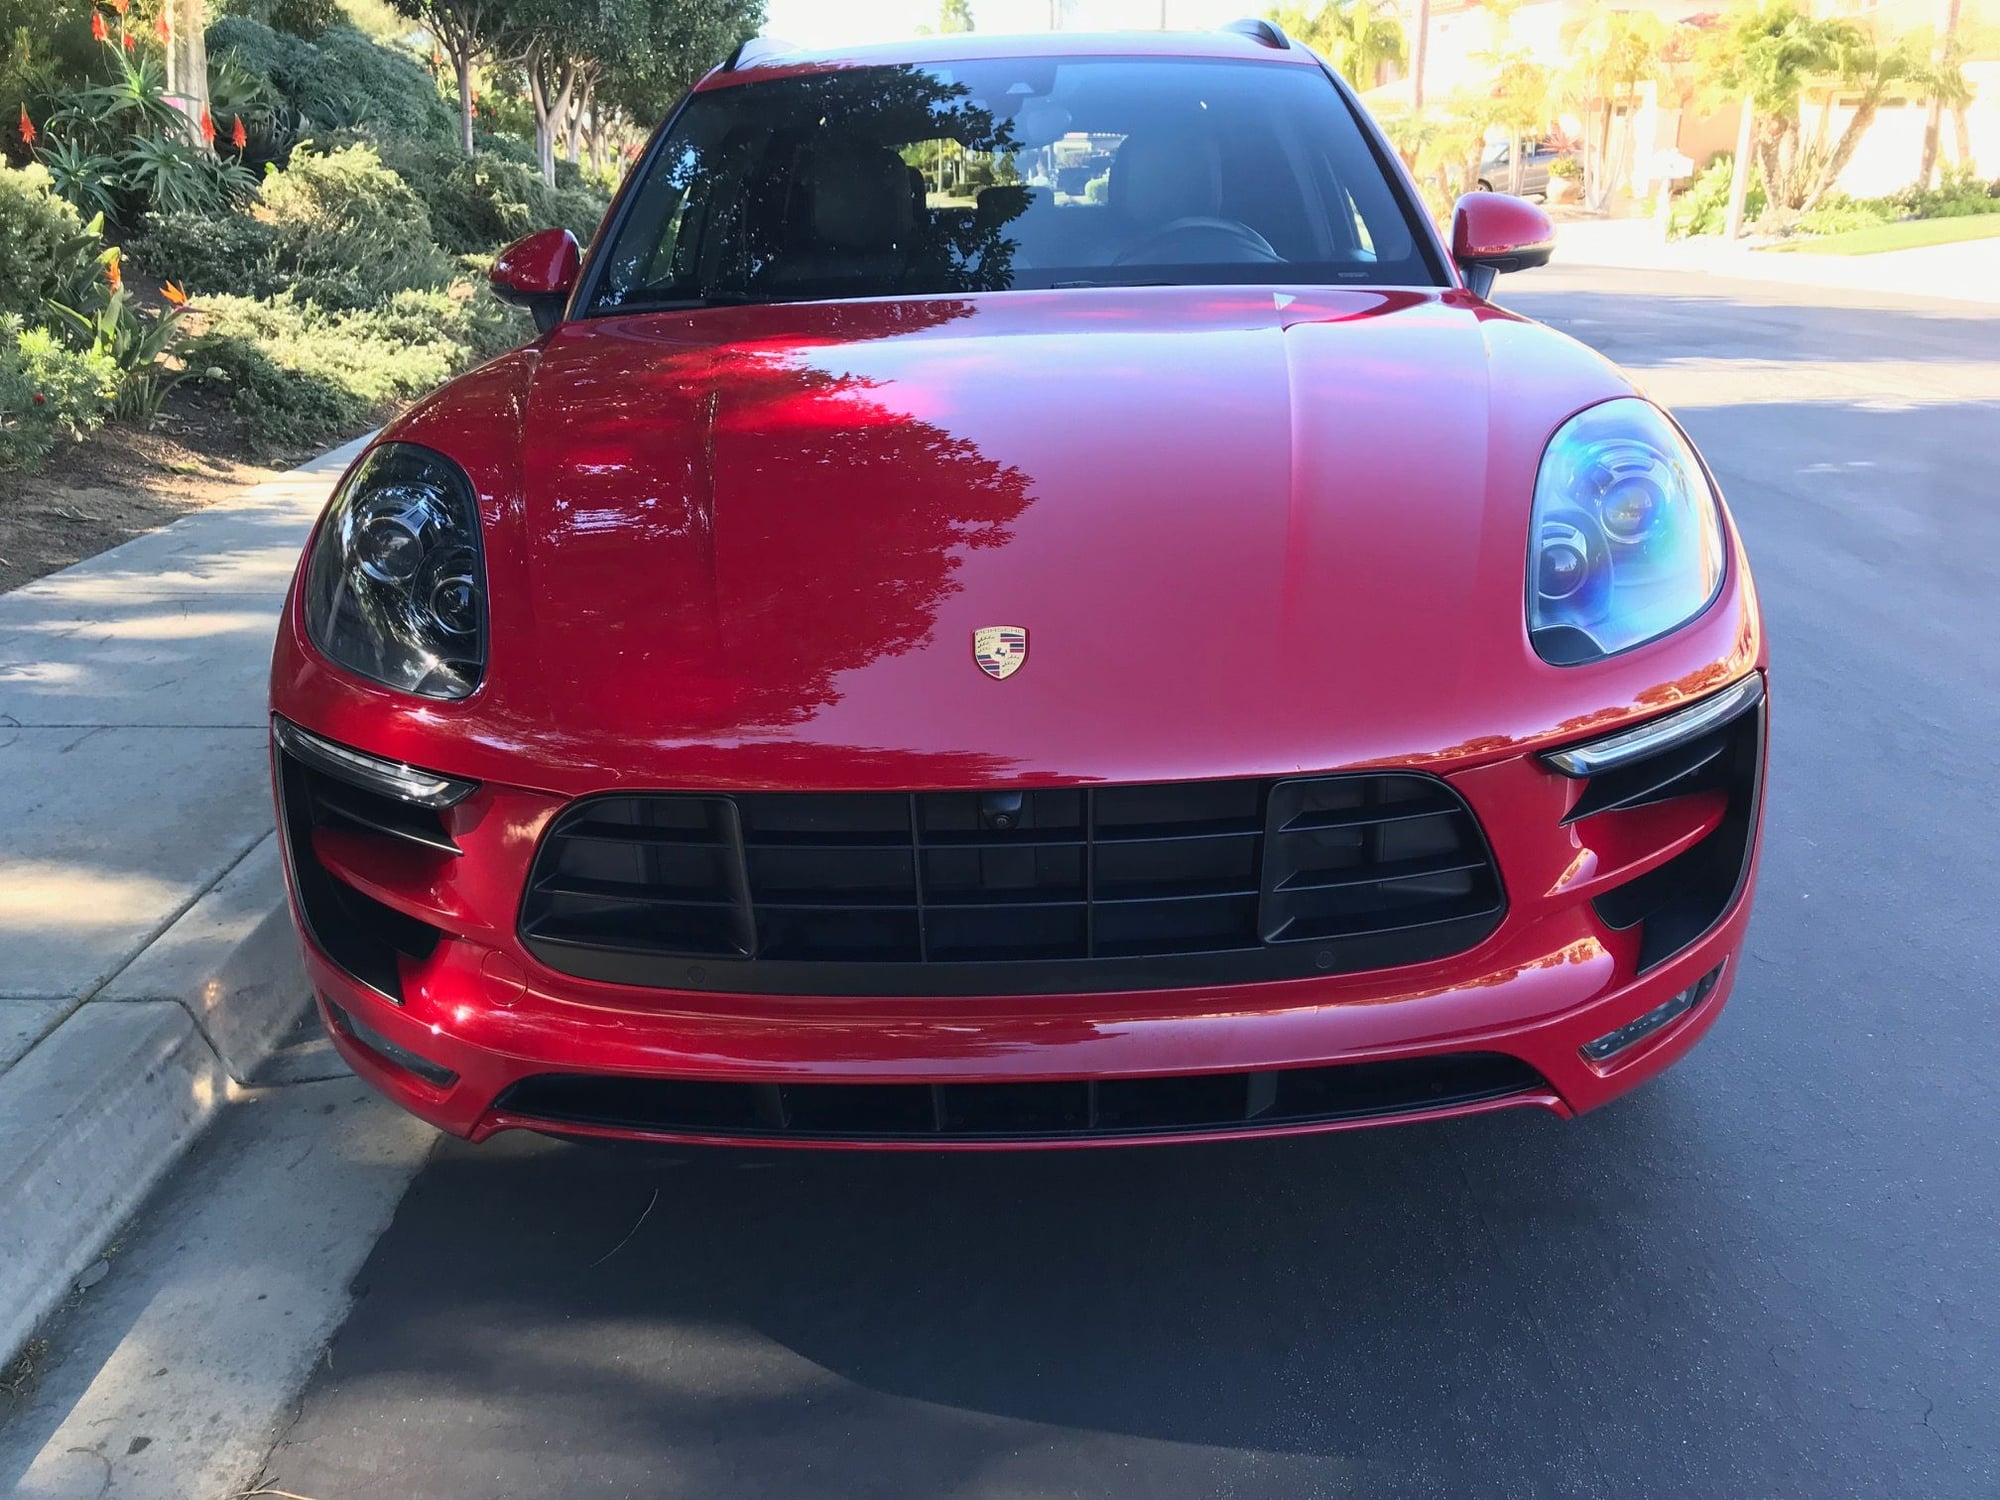 2017 Porsche Macan - 2017 Macan GTS - Used - VIN wp1ag2a57hlb52761 - 23,400 Miles - 6 cyl - AWD - Automatic - SUV - Red - Carlsbad, CA 92011, United States